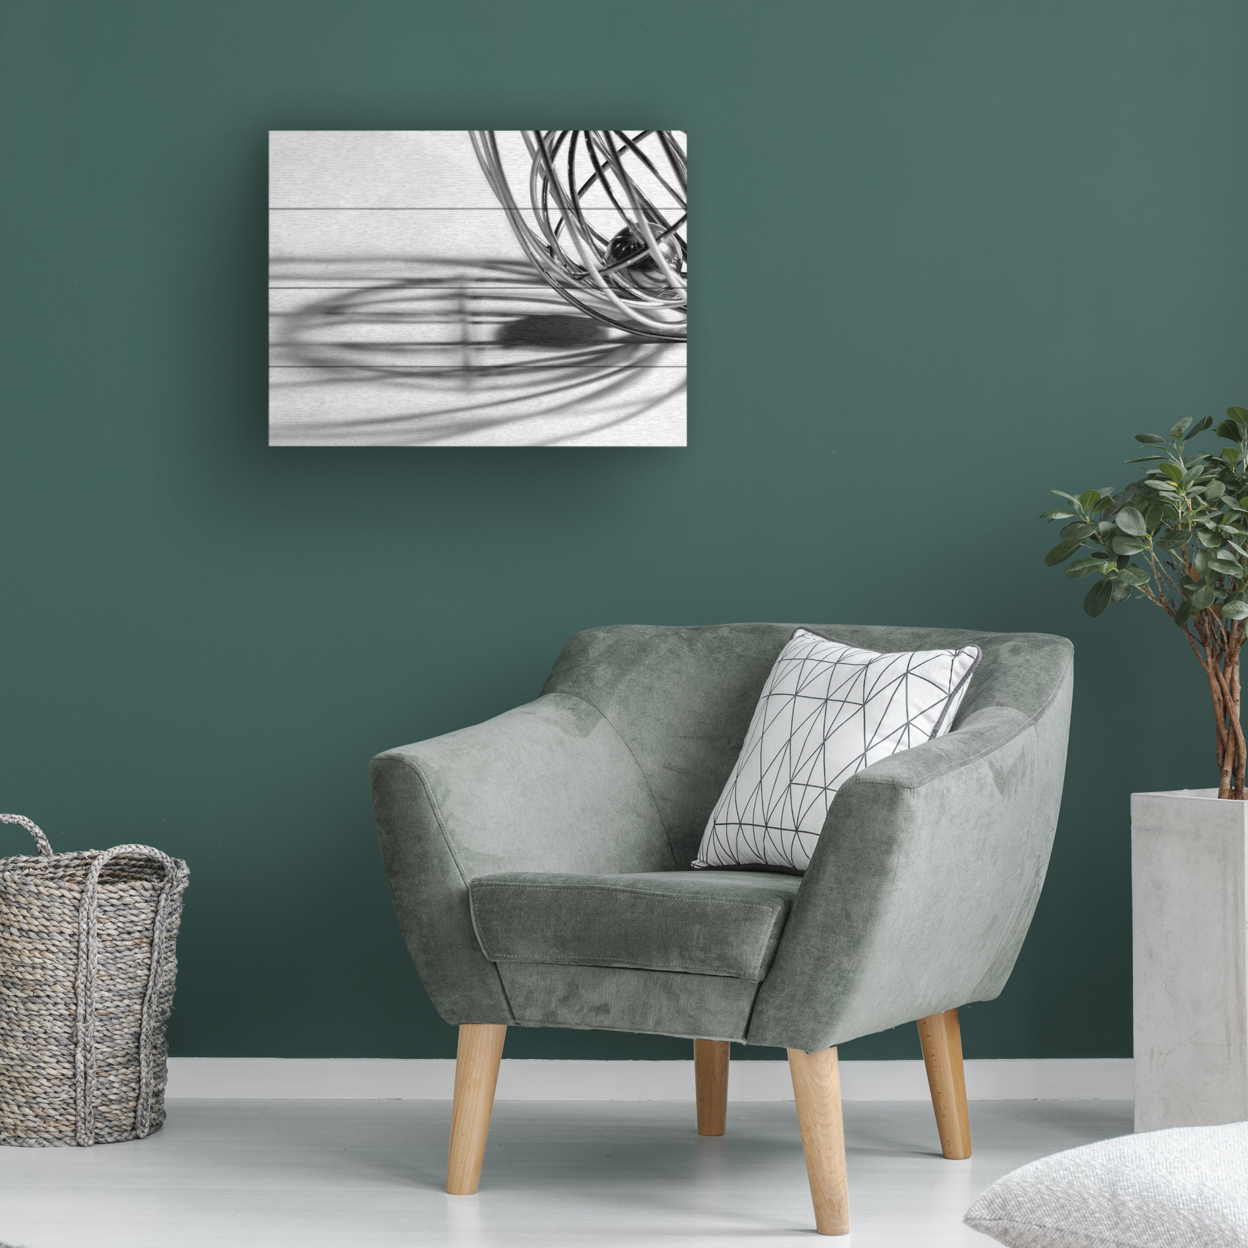 Wall Art 12 X 16 Inches Titled Whisk Ready To Hang Printed On Wooden Planks